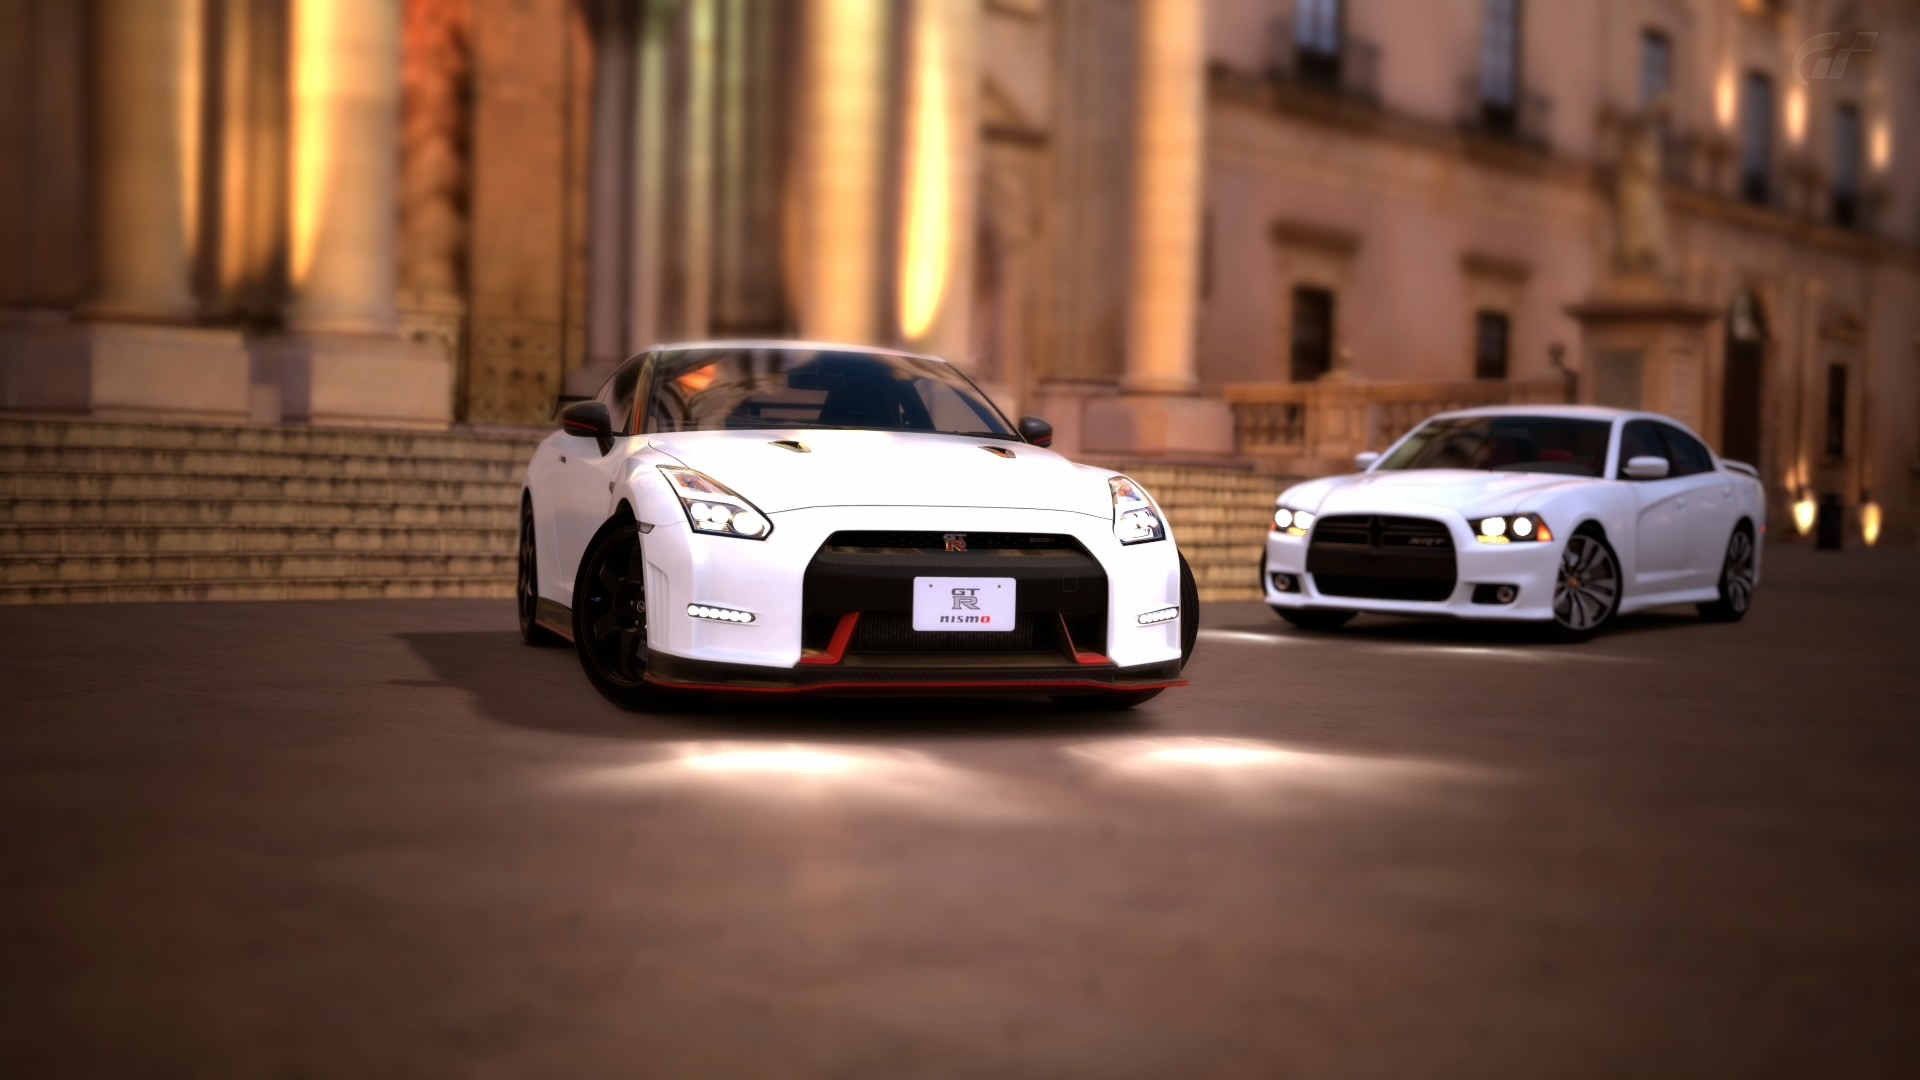 General 1920x1080 Gran Turismo 6 Nissan GT-R car Nissan vehicle white cars Dodge Dodge Charger muscle cars Japanese cars American cars Stellantis